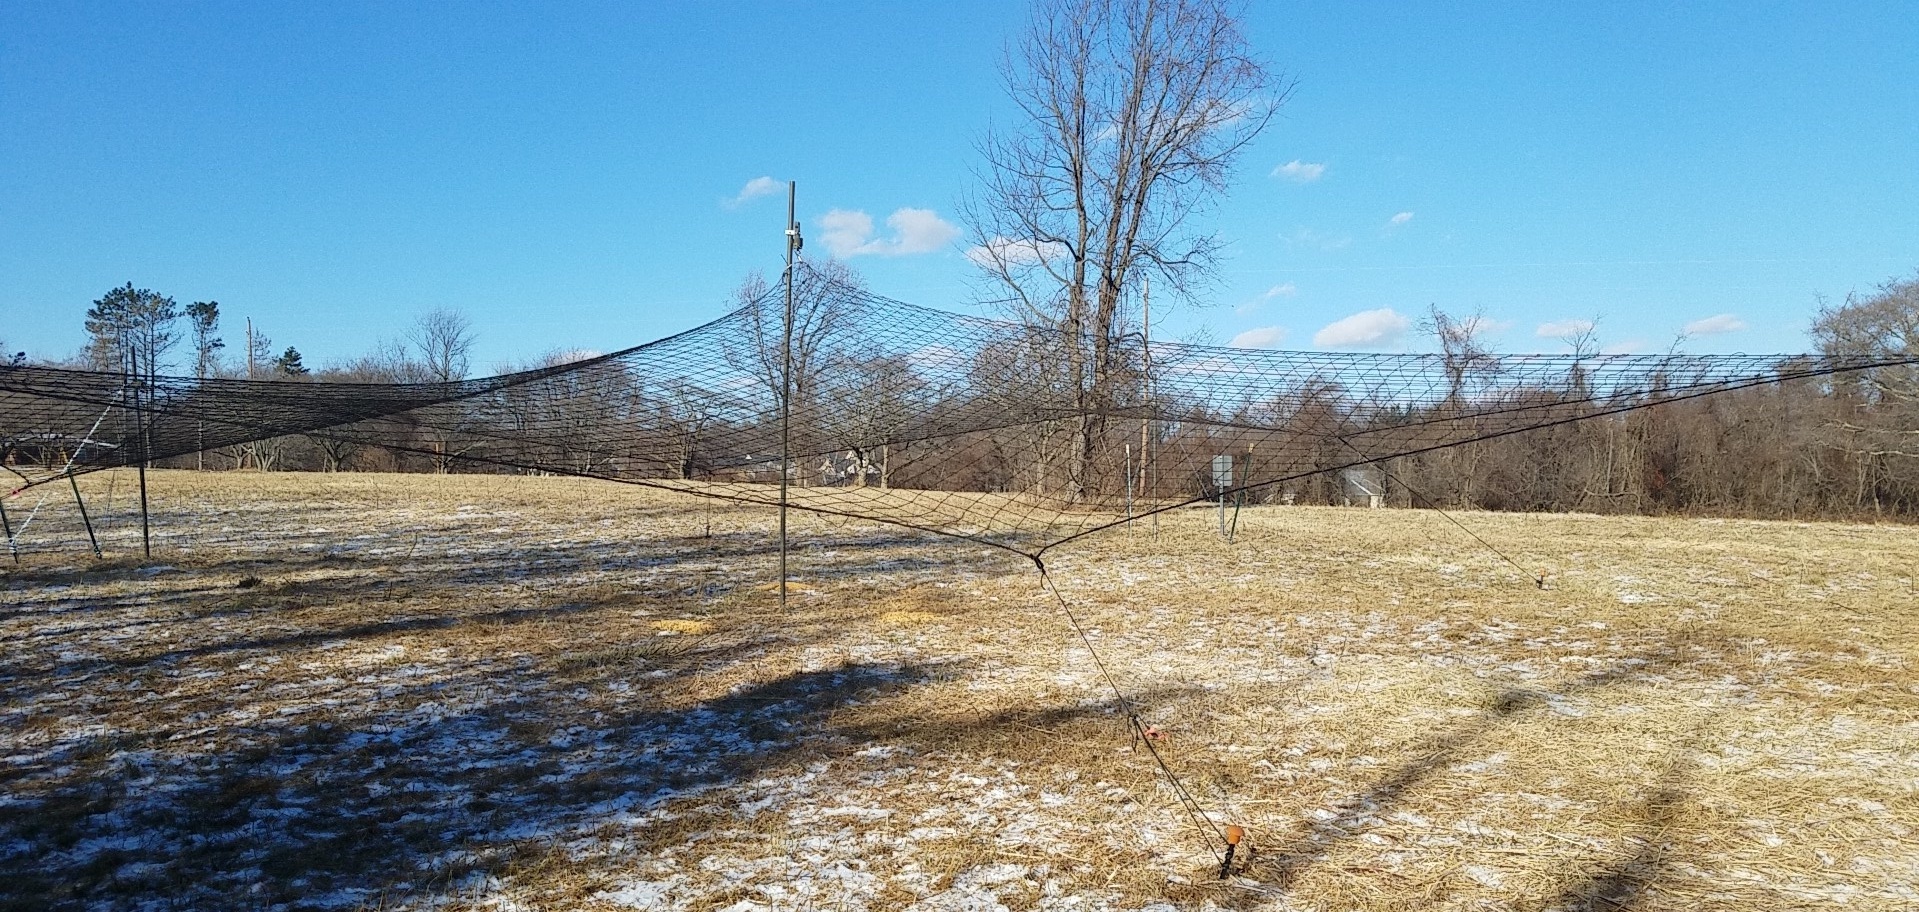 Example of a drop net that will be used to capture deer in the Washington, D.C. region